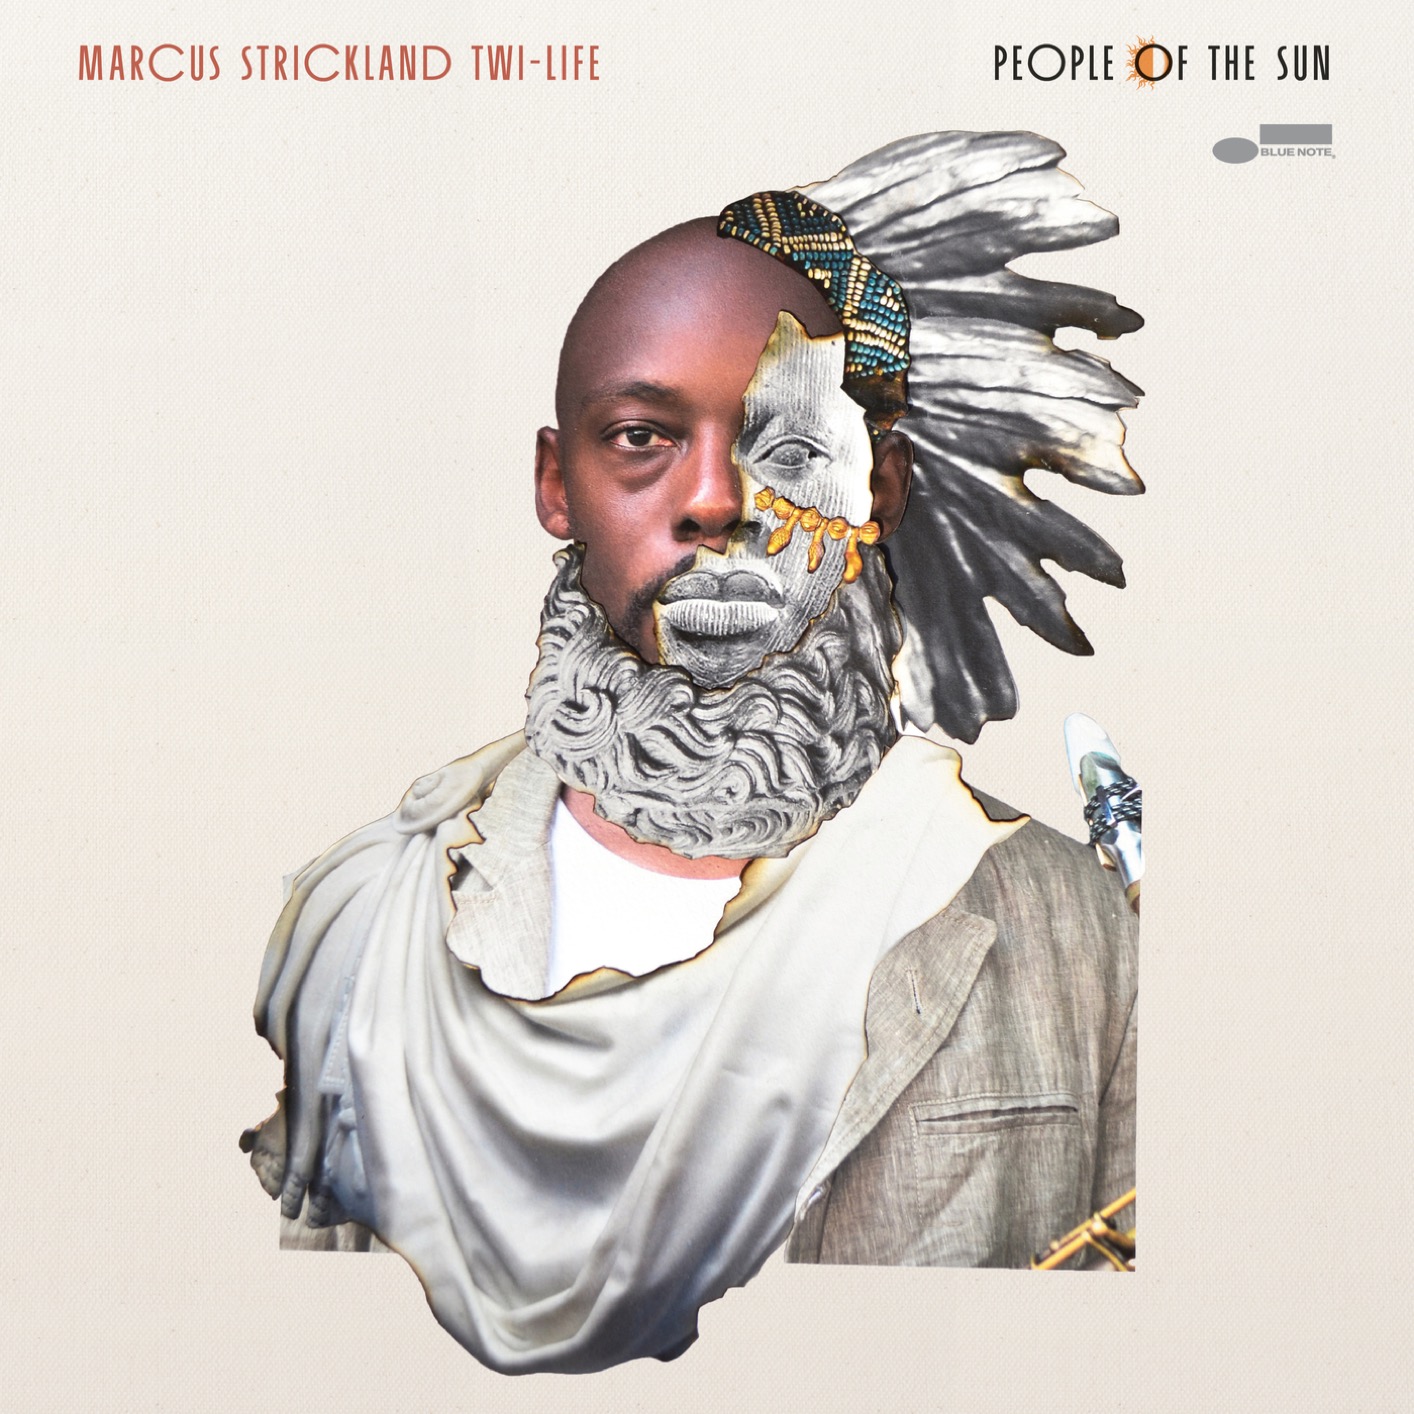 Marcus Strickland Twi-Life - People Of The Sun (2018) [FLAC 24bit/96kHz]